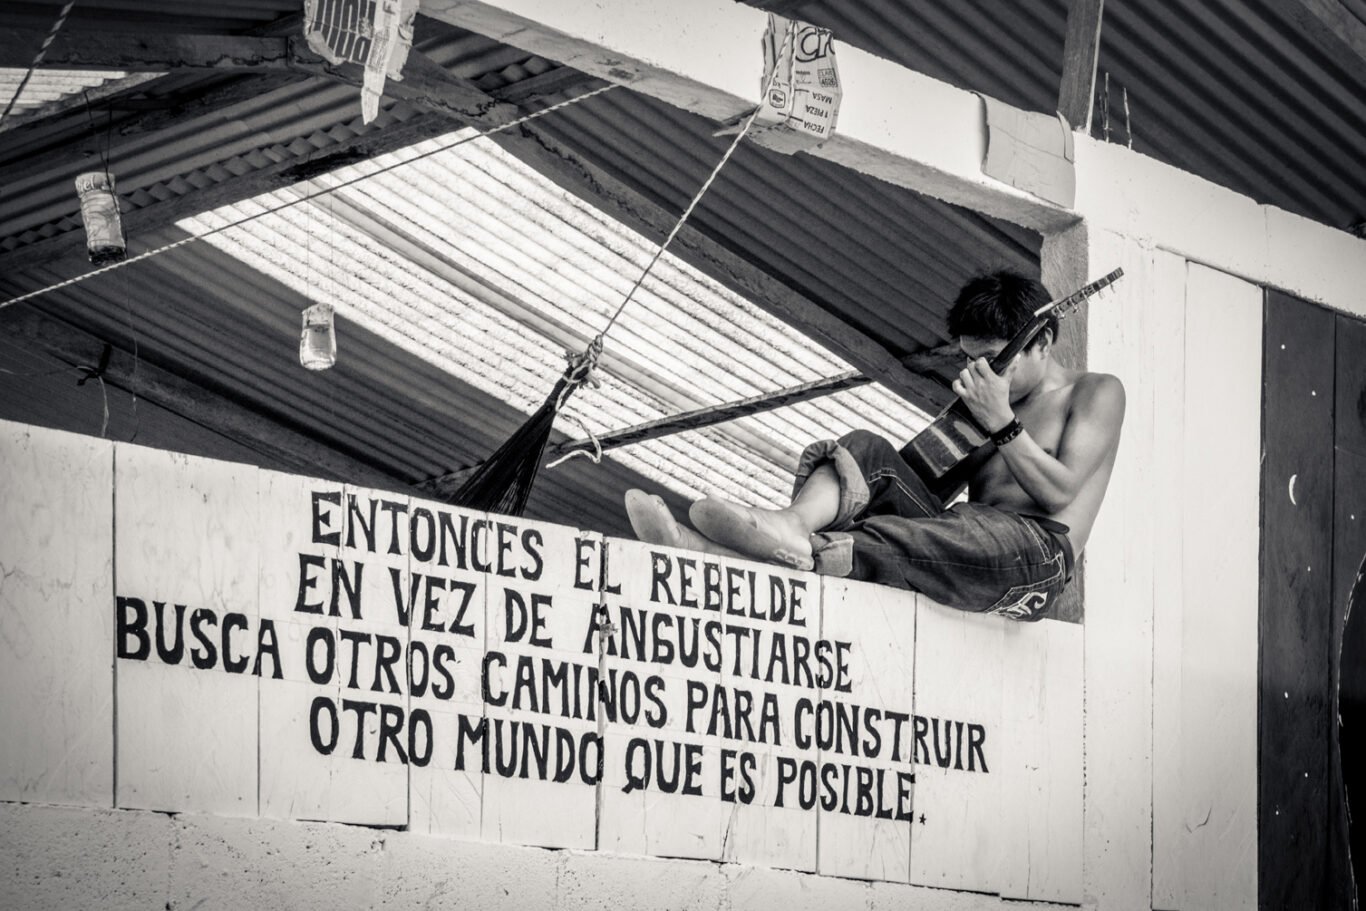 Am indigenous man playing guitar on a wall in Chiapas, Mexico.Roberto Barrio.